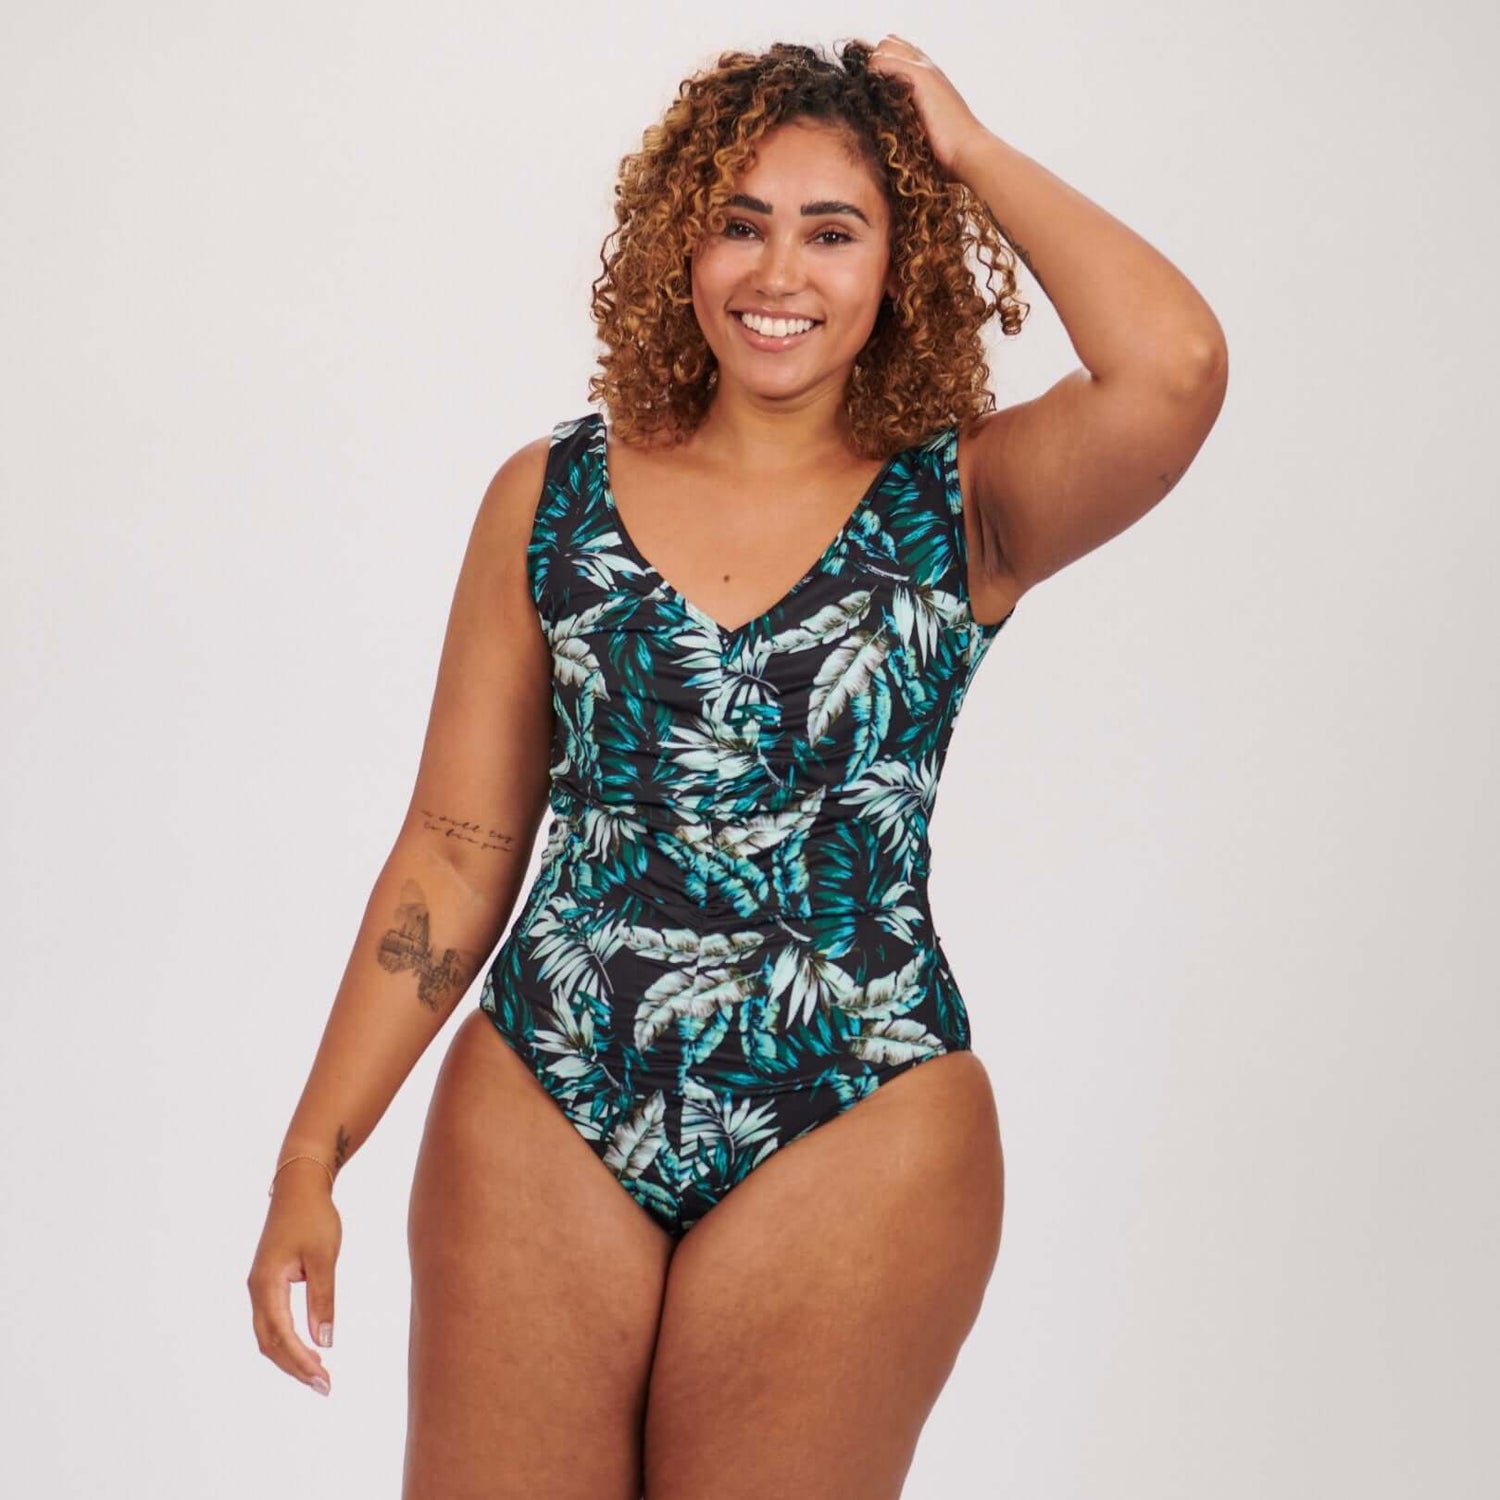 Shop Jessica Womens Ostomy Swimsuit only £34.99 at whiteroseostomy.co.uk- with free UK delivery on all orders over £50